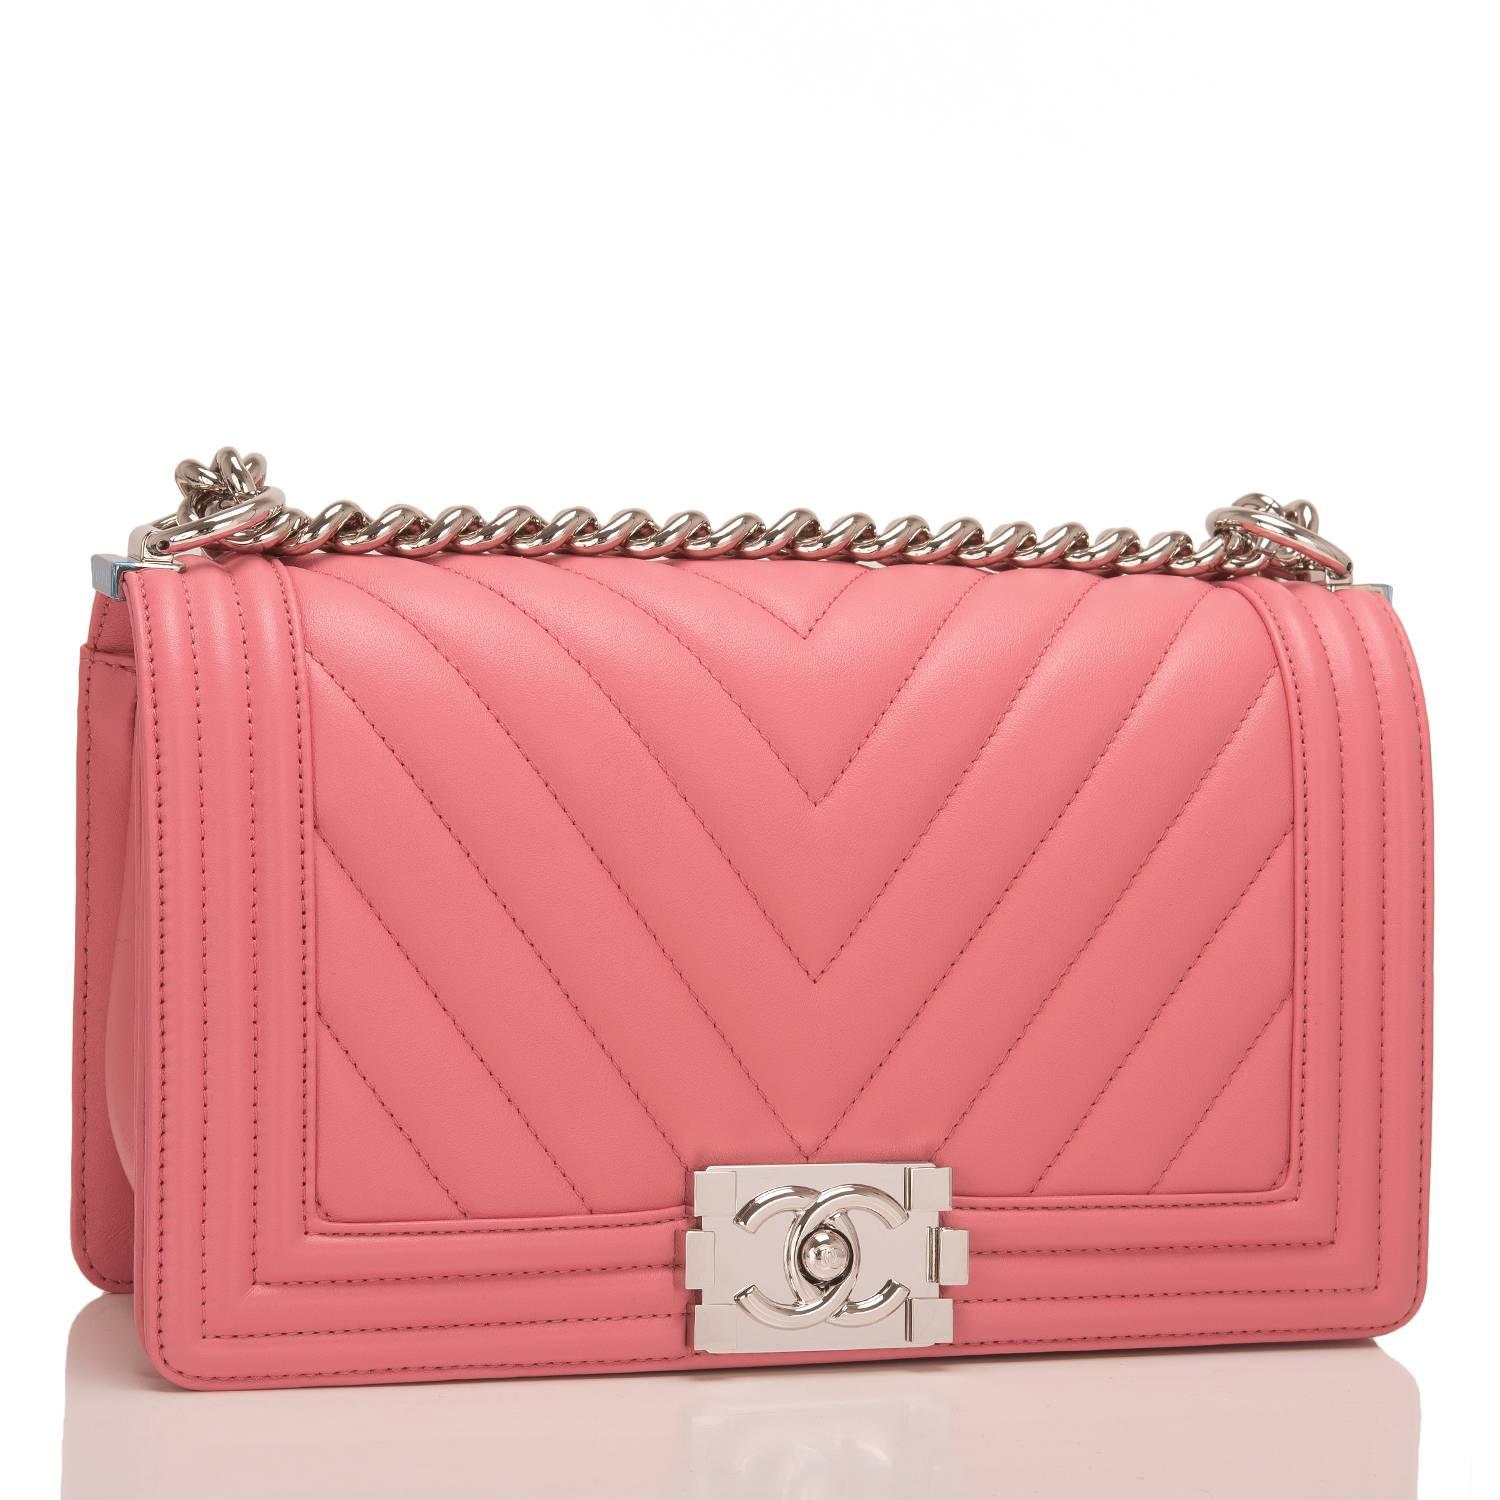 Chanel chevron quilted Medium Boy bag of pink lambskin leather with silver tone hardware.

This bag features a full front flap with the Le Boy CC push lock closure and a silver tone chain link and pink leather padded shoulder/crossbody